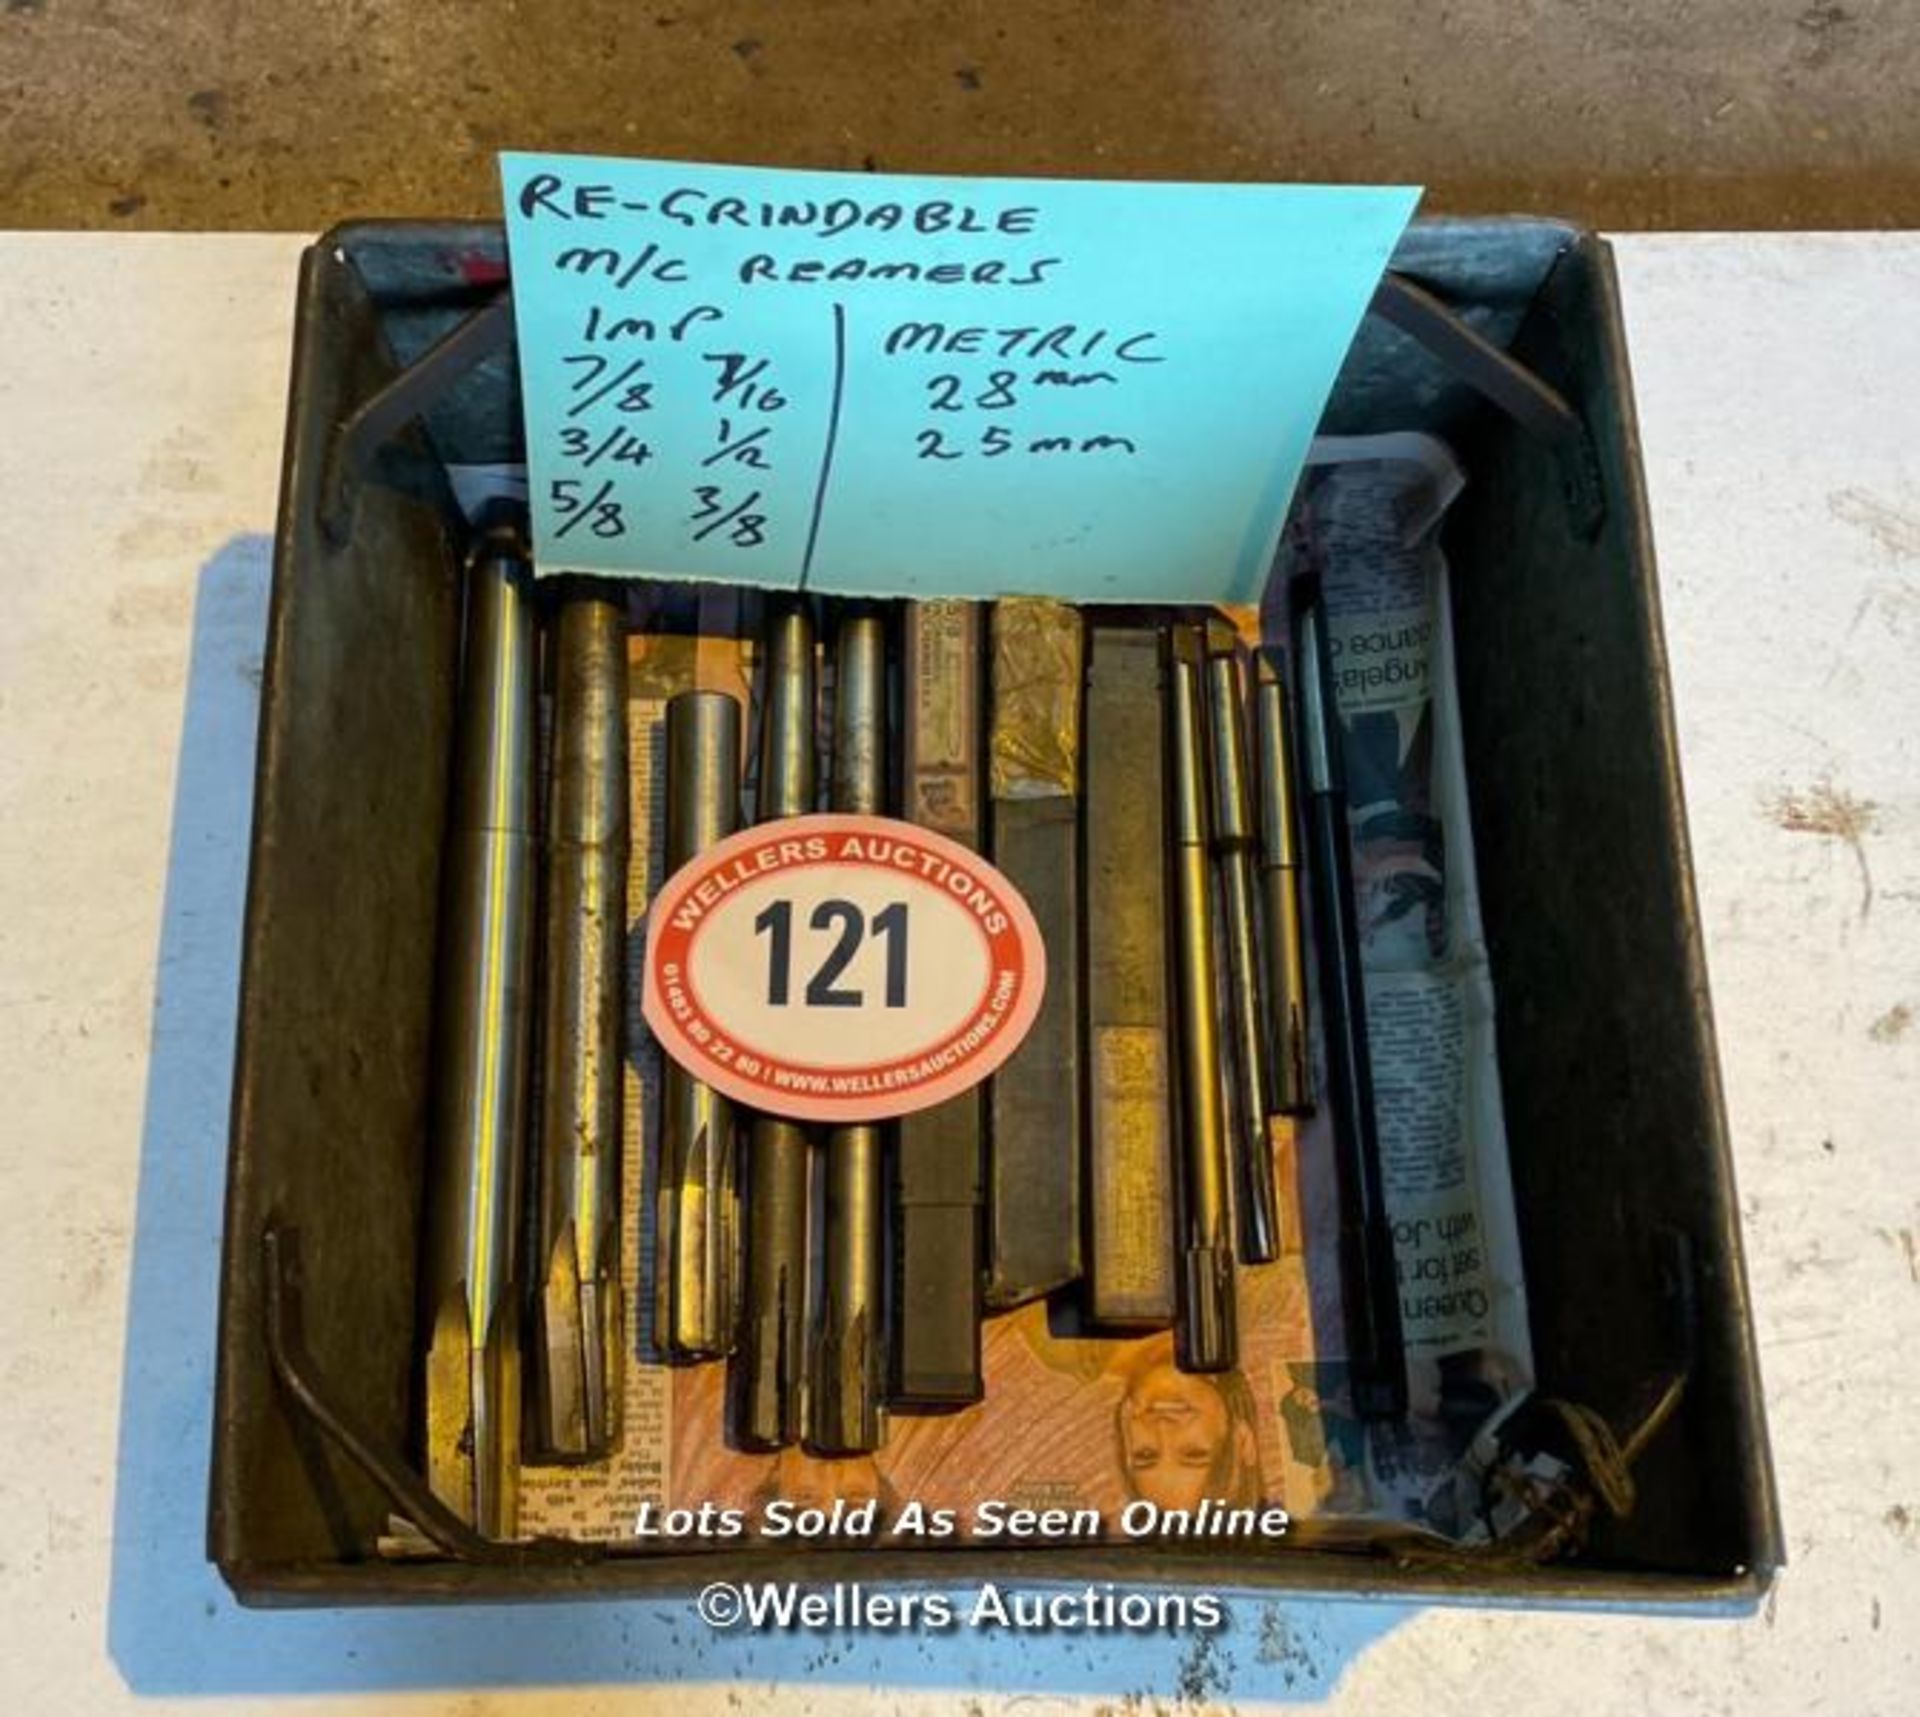 VARIOUS REGRINDABLE MACHINERY REAMERS, IMPERIAL AND METRIC